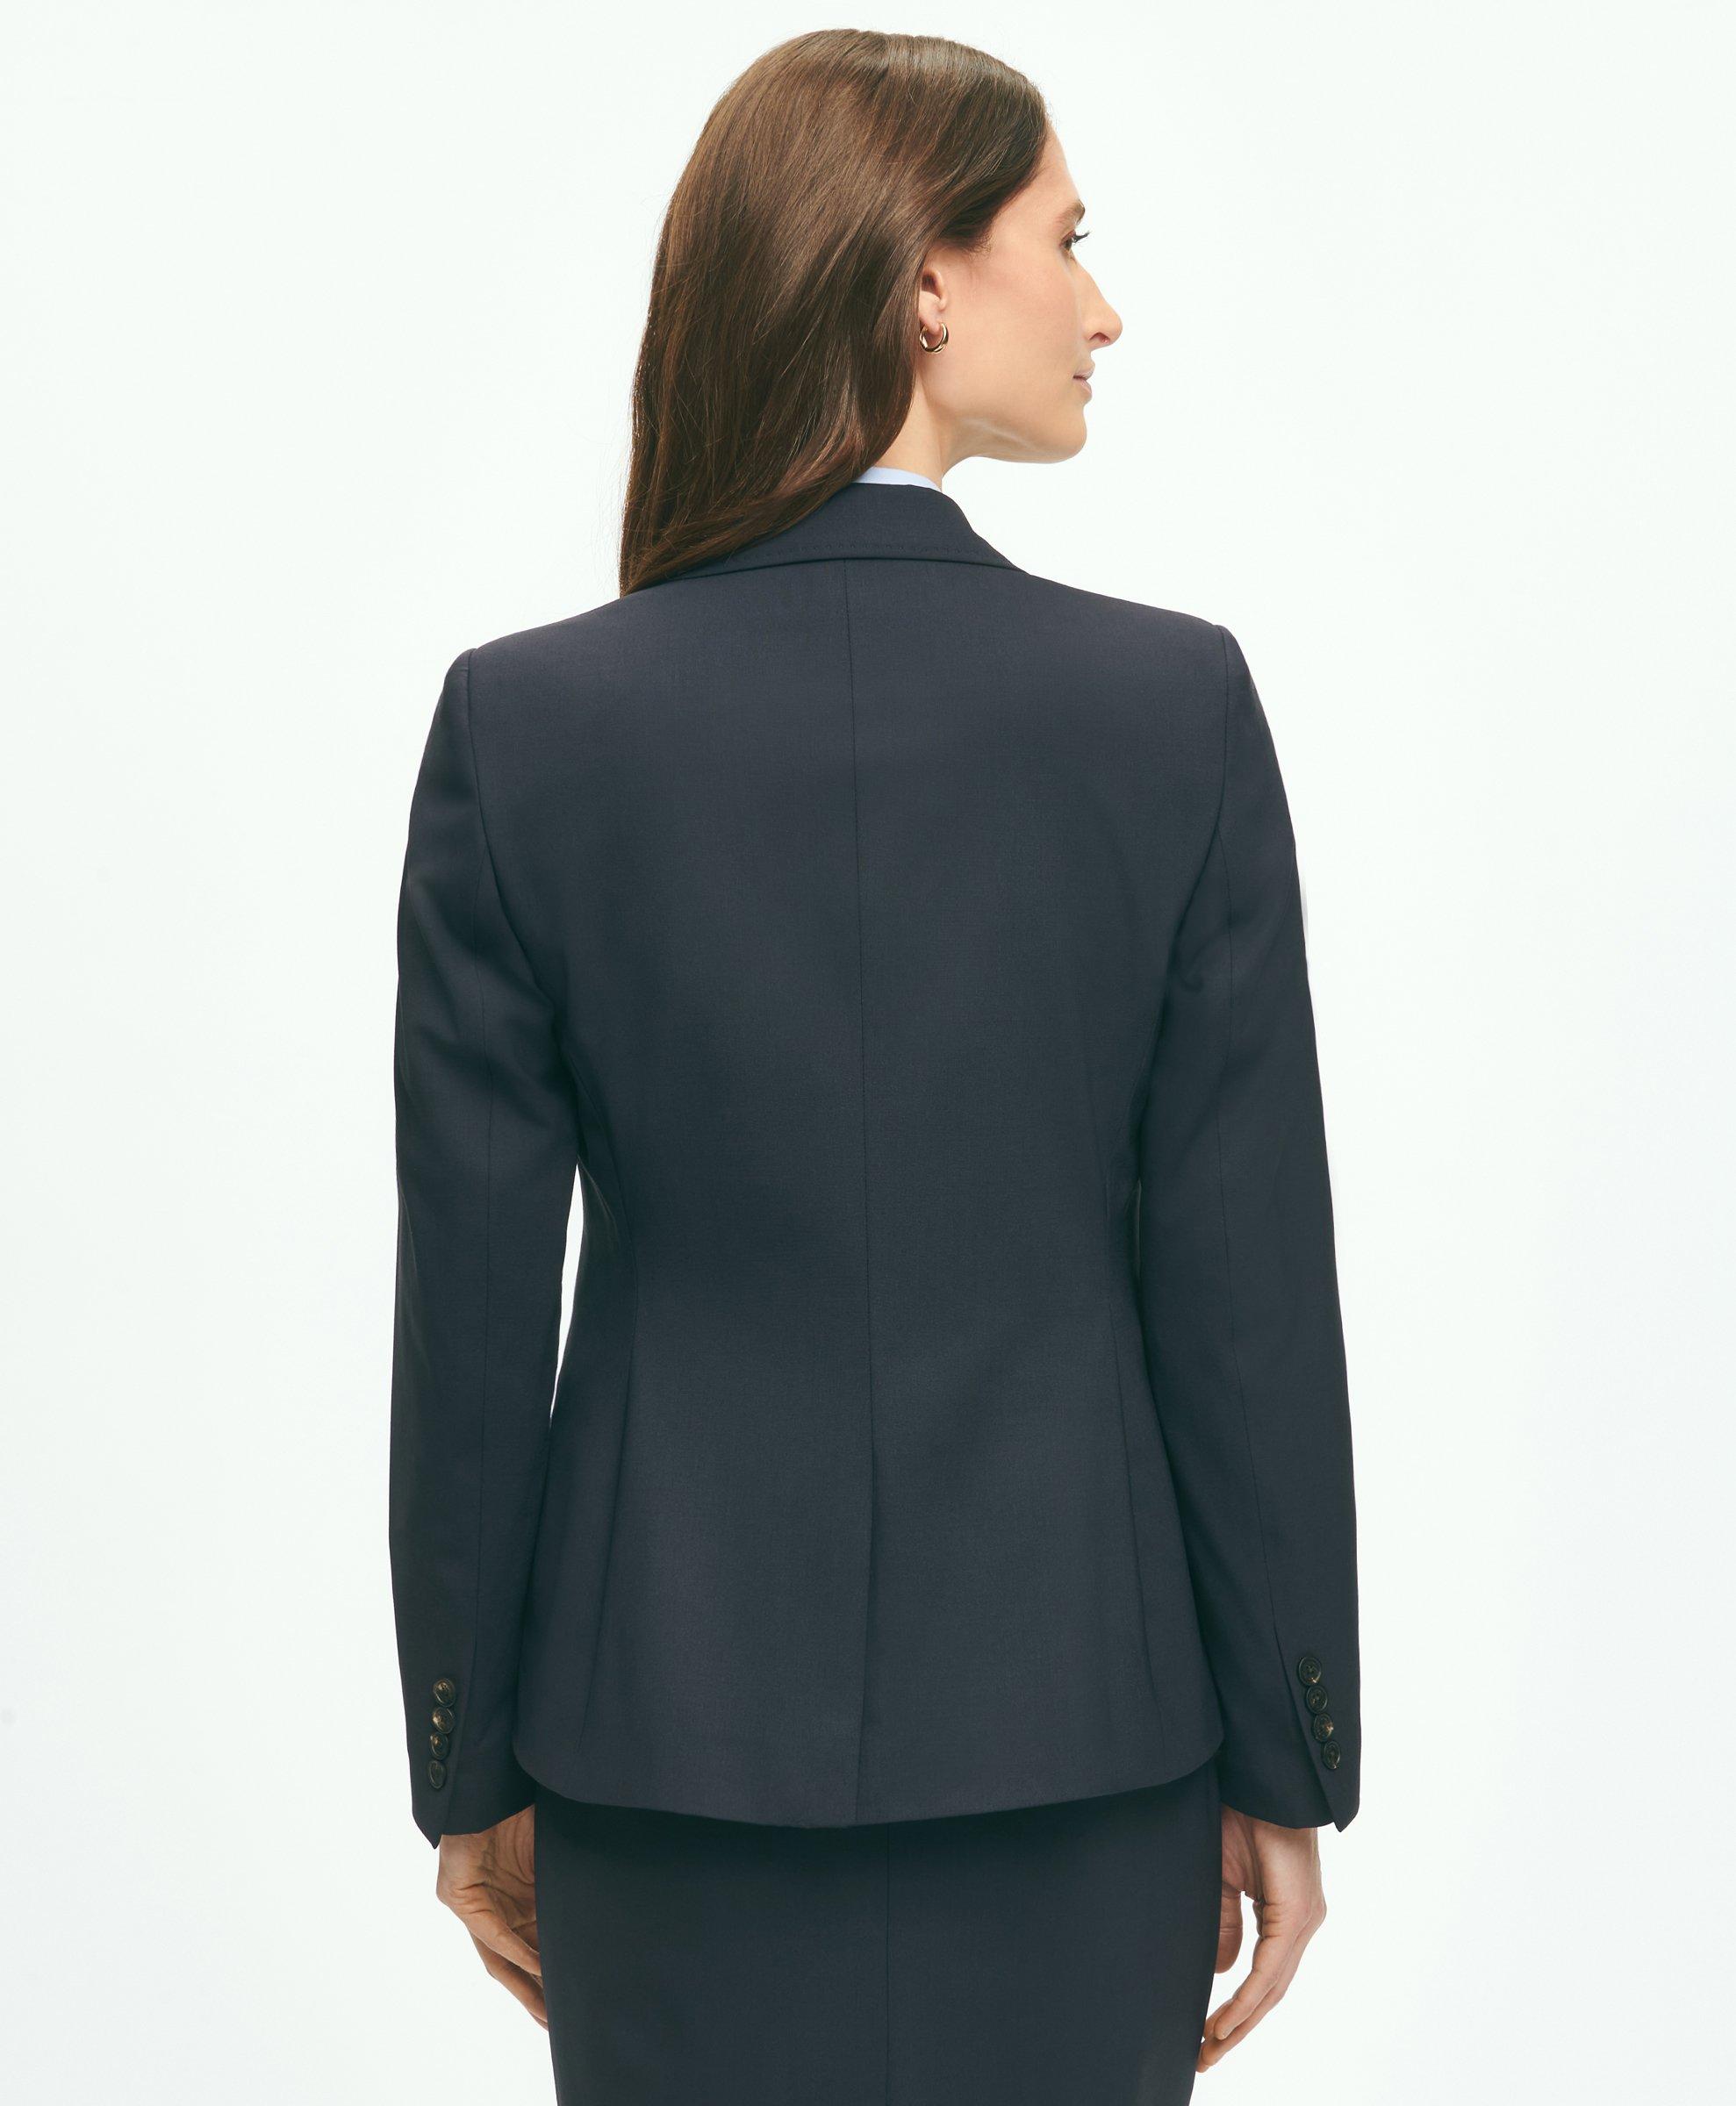 The Essential Brooks Brothers Stretch Wool Jacket